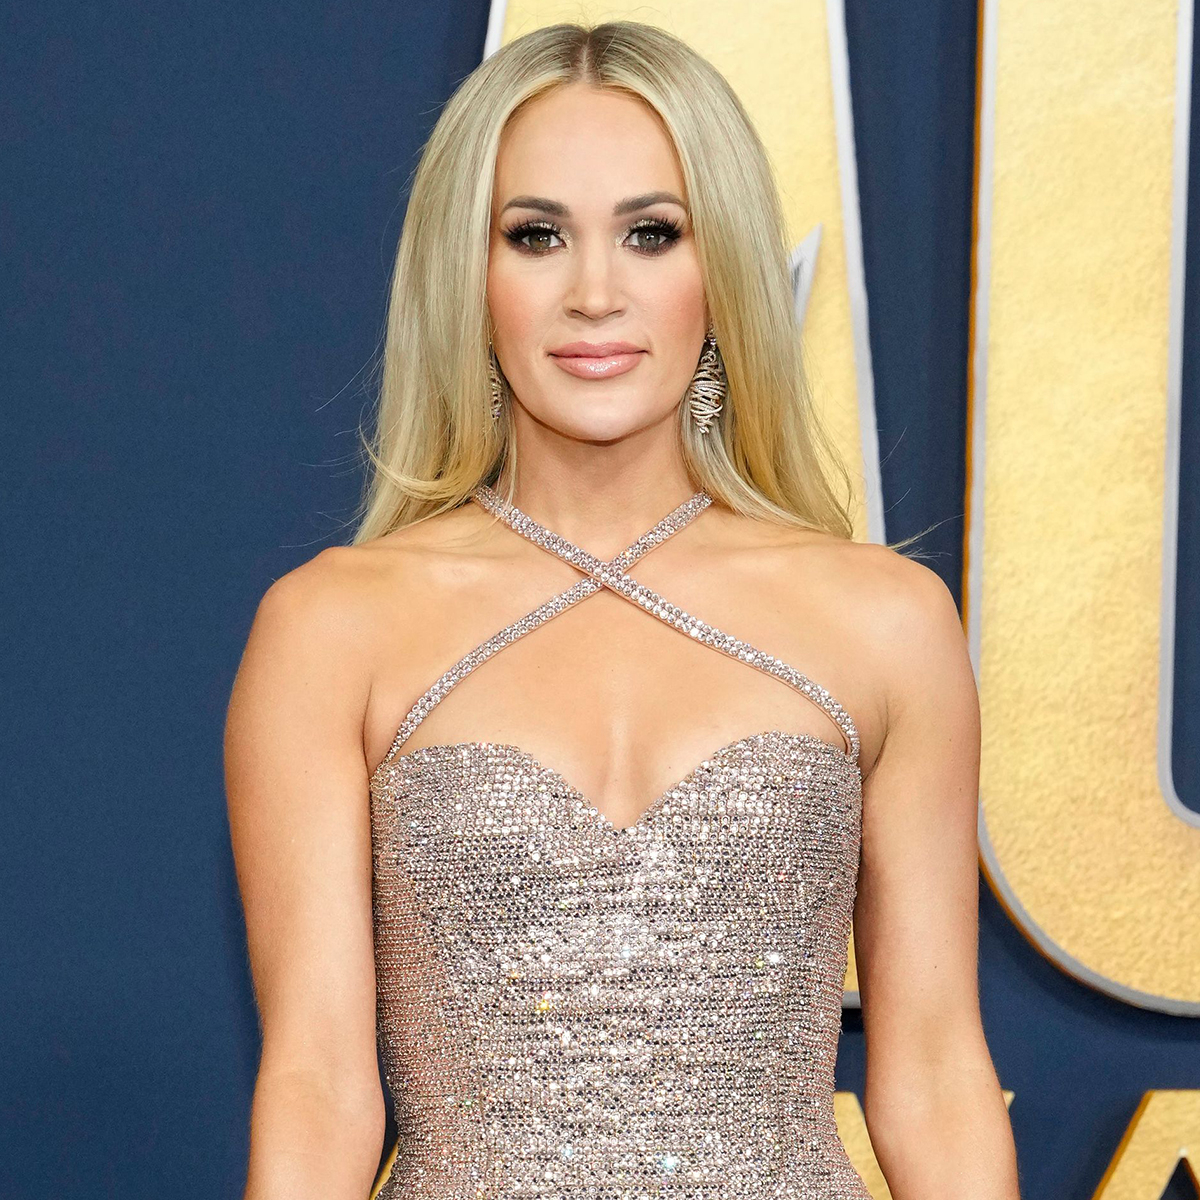 Carrie Underwood Sex Tape Porn - See Carrie Underwood Sparkle and Shine at 2022 ACM Awards - E! Online